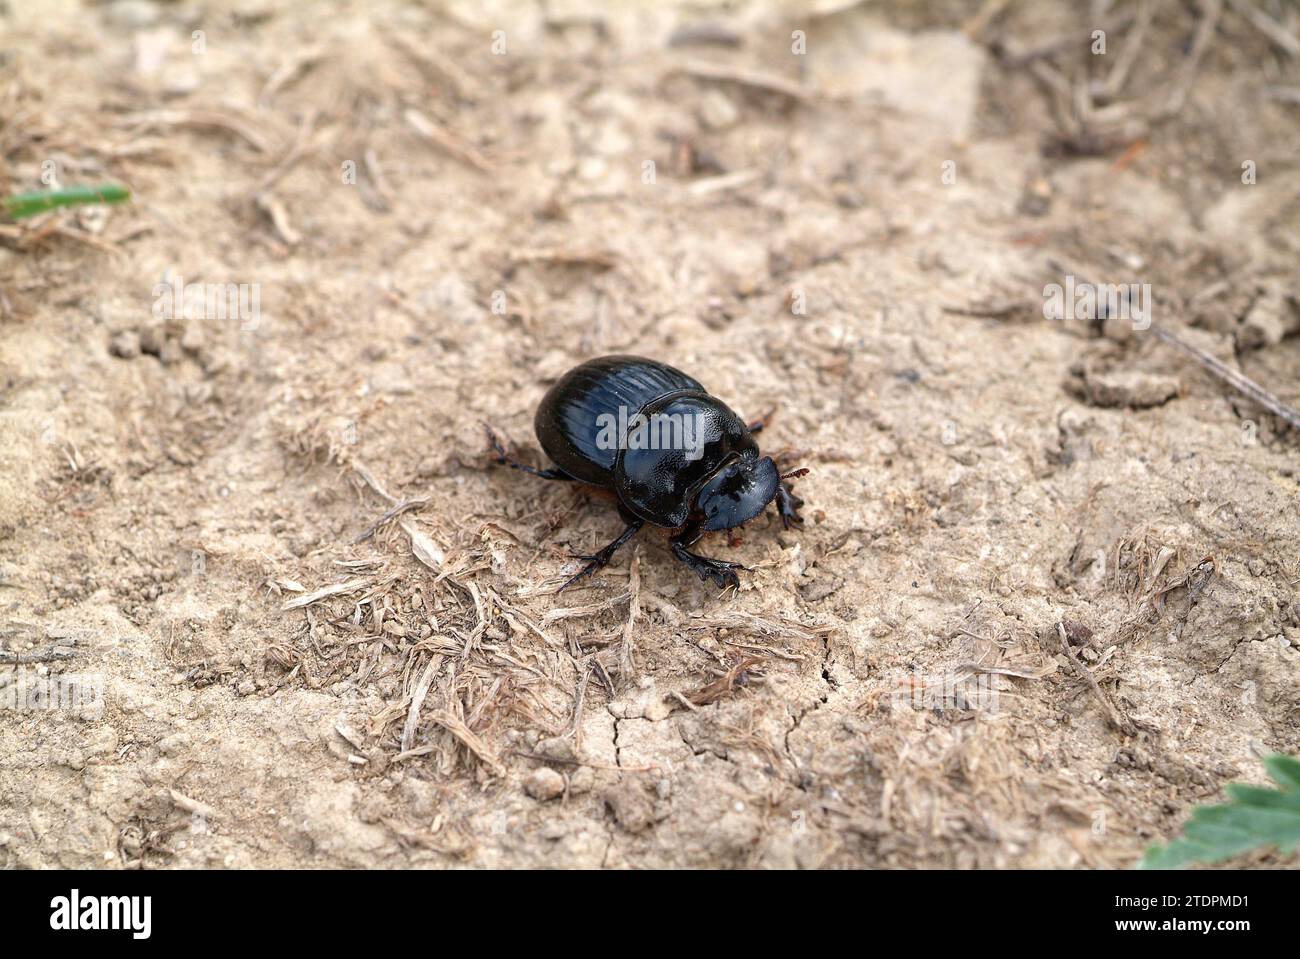 Horned dung beetle female (Copris lunaris) is a beetle native to Eurasia. Stock Photo